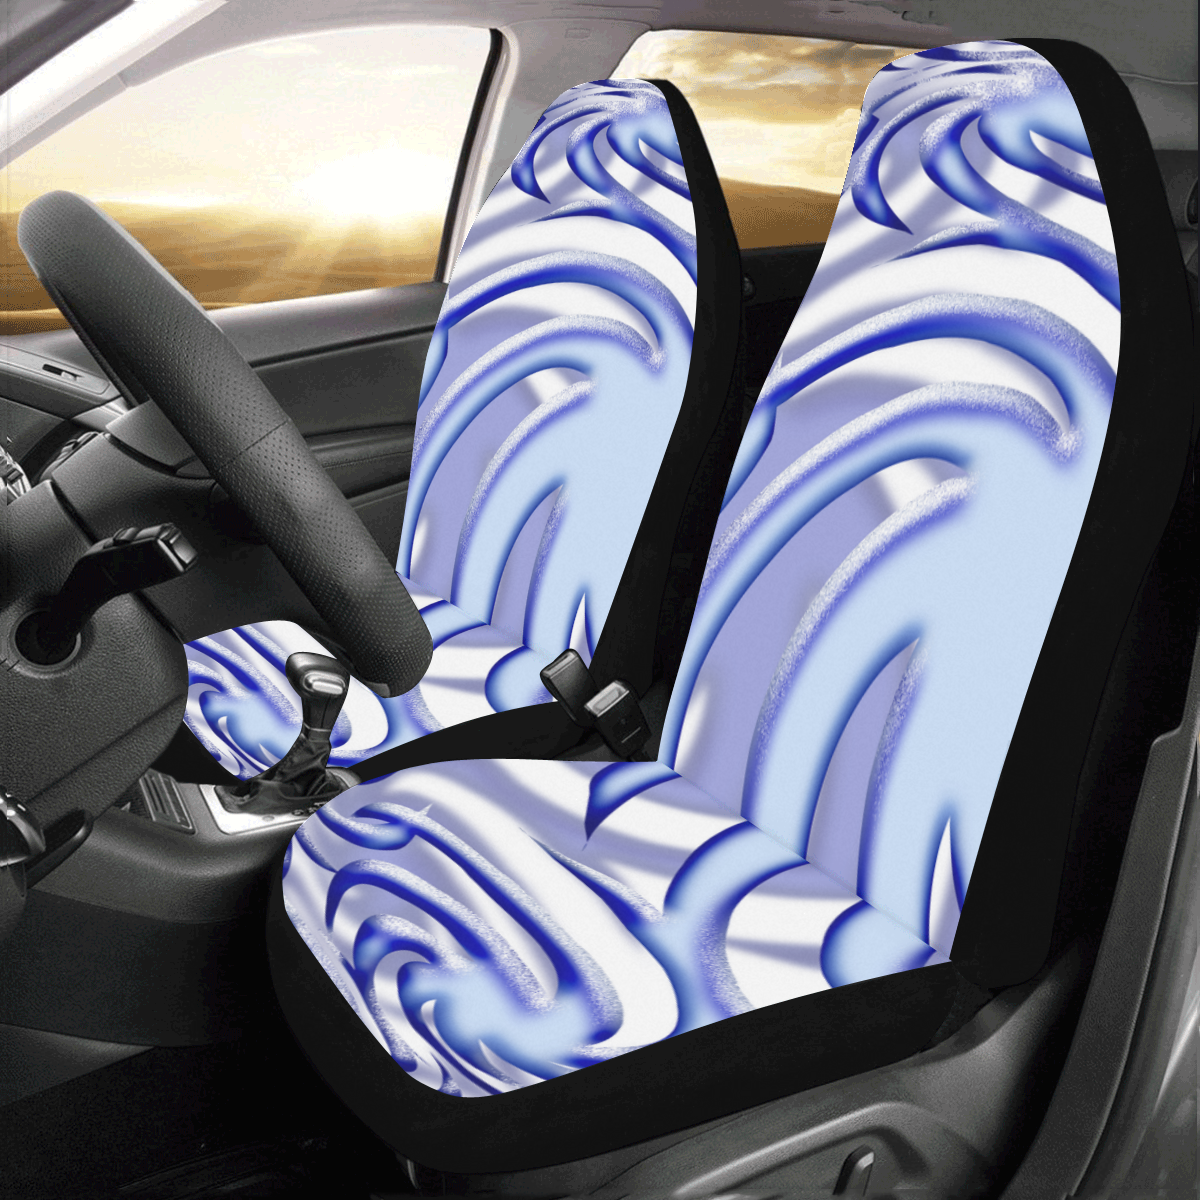 3-D Blue Ball Car Seat Covers (Set of 2)